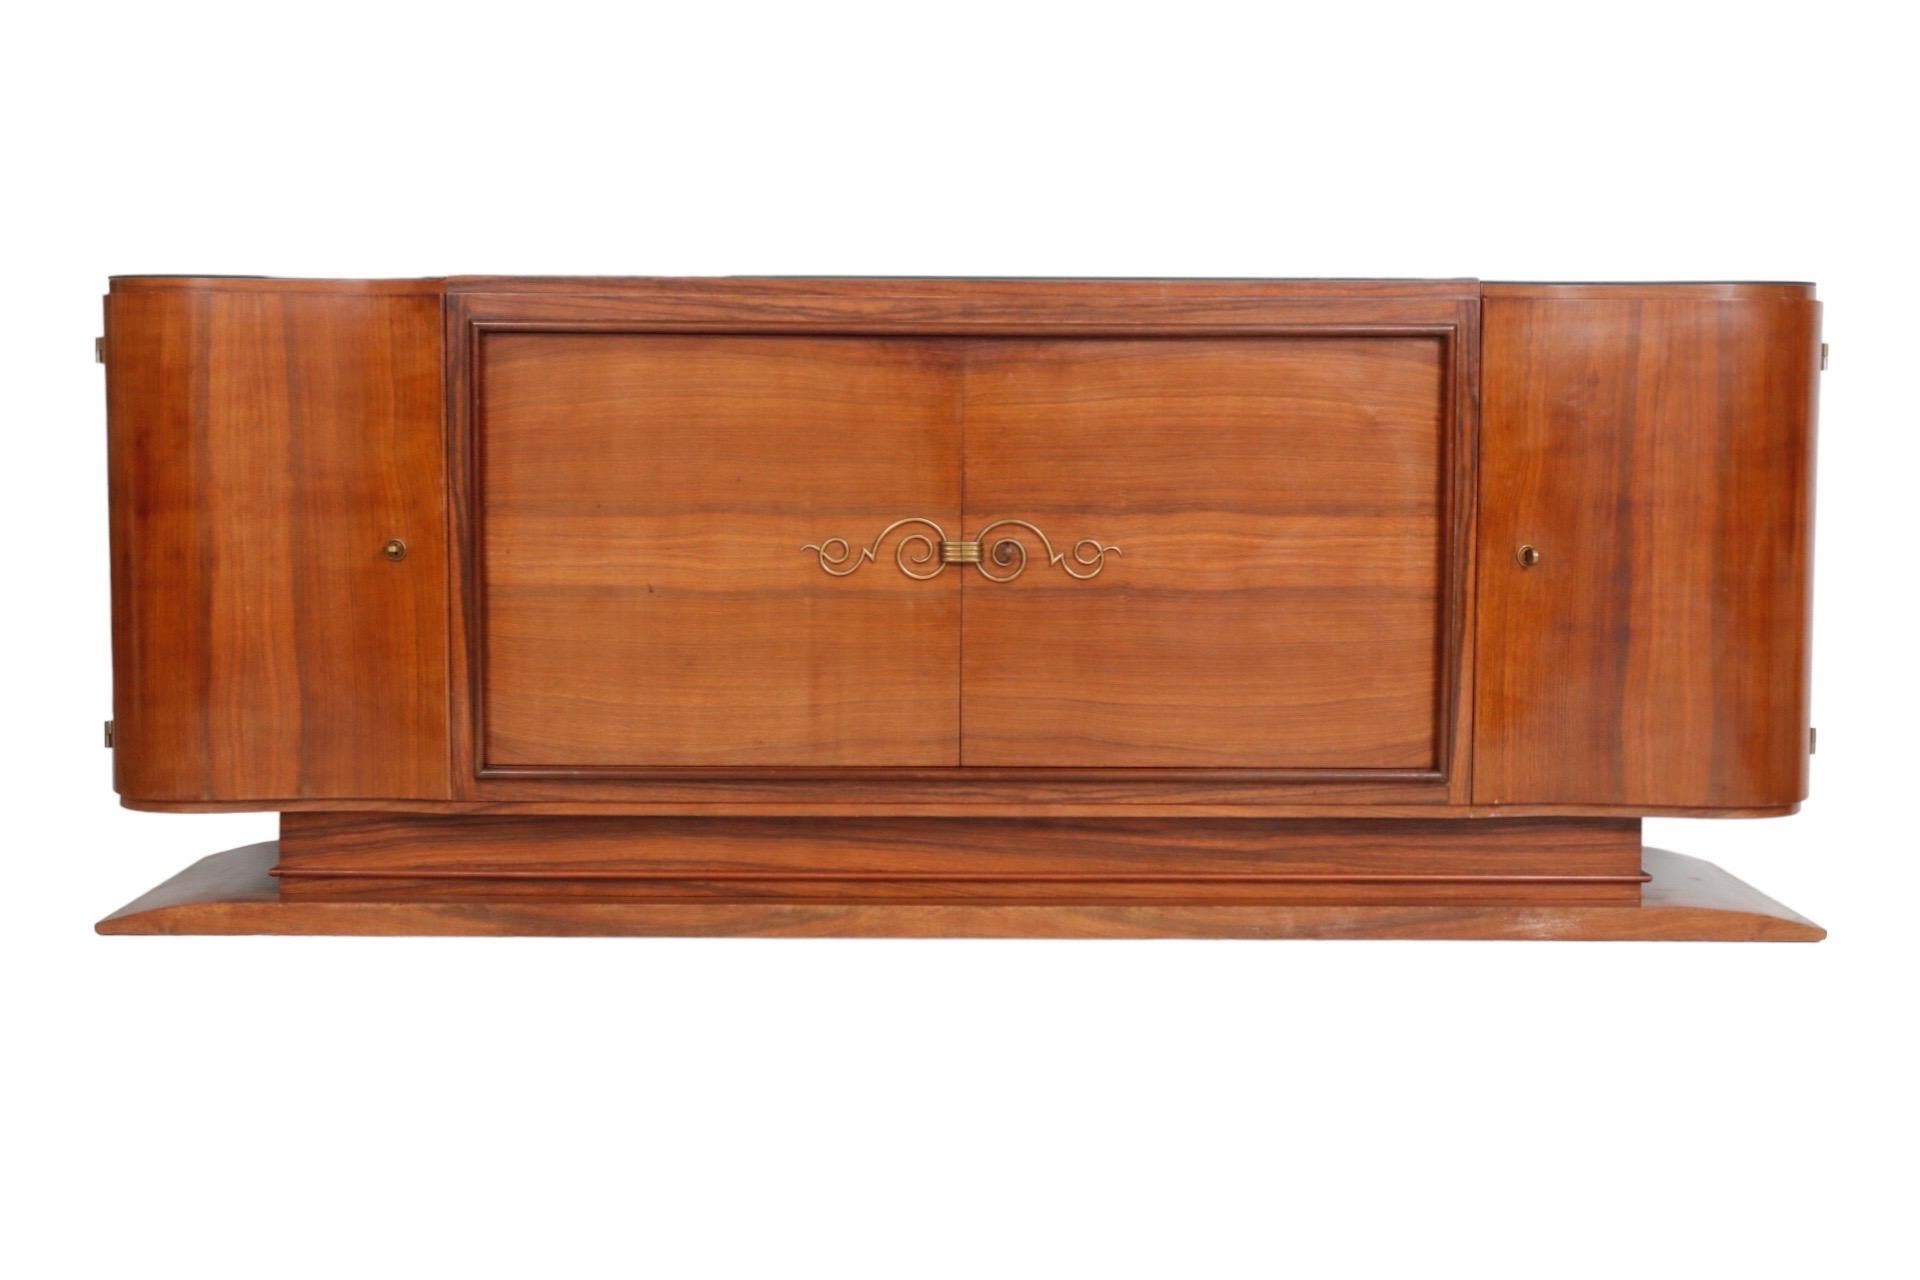 A French Art Deco period sideboard attributed to Jules Leleu. Made of mahogany, it consists of four seperate pieces secured together with bolts. A central cabinet with a beveled frame has book matched cabinet doors decorated with an elaborately